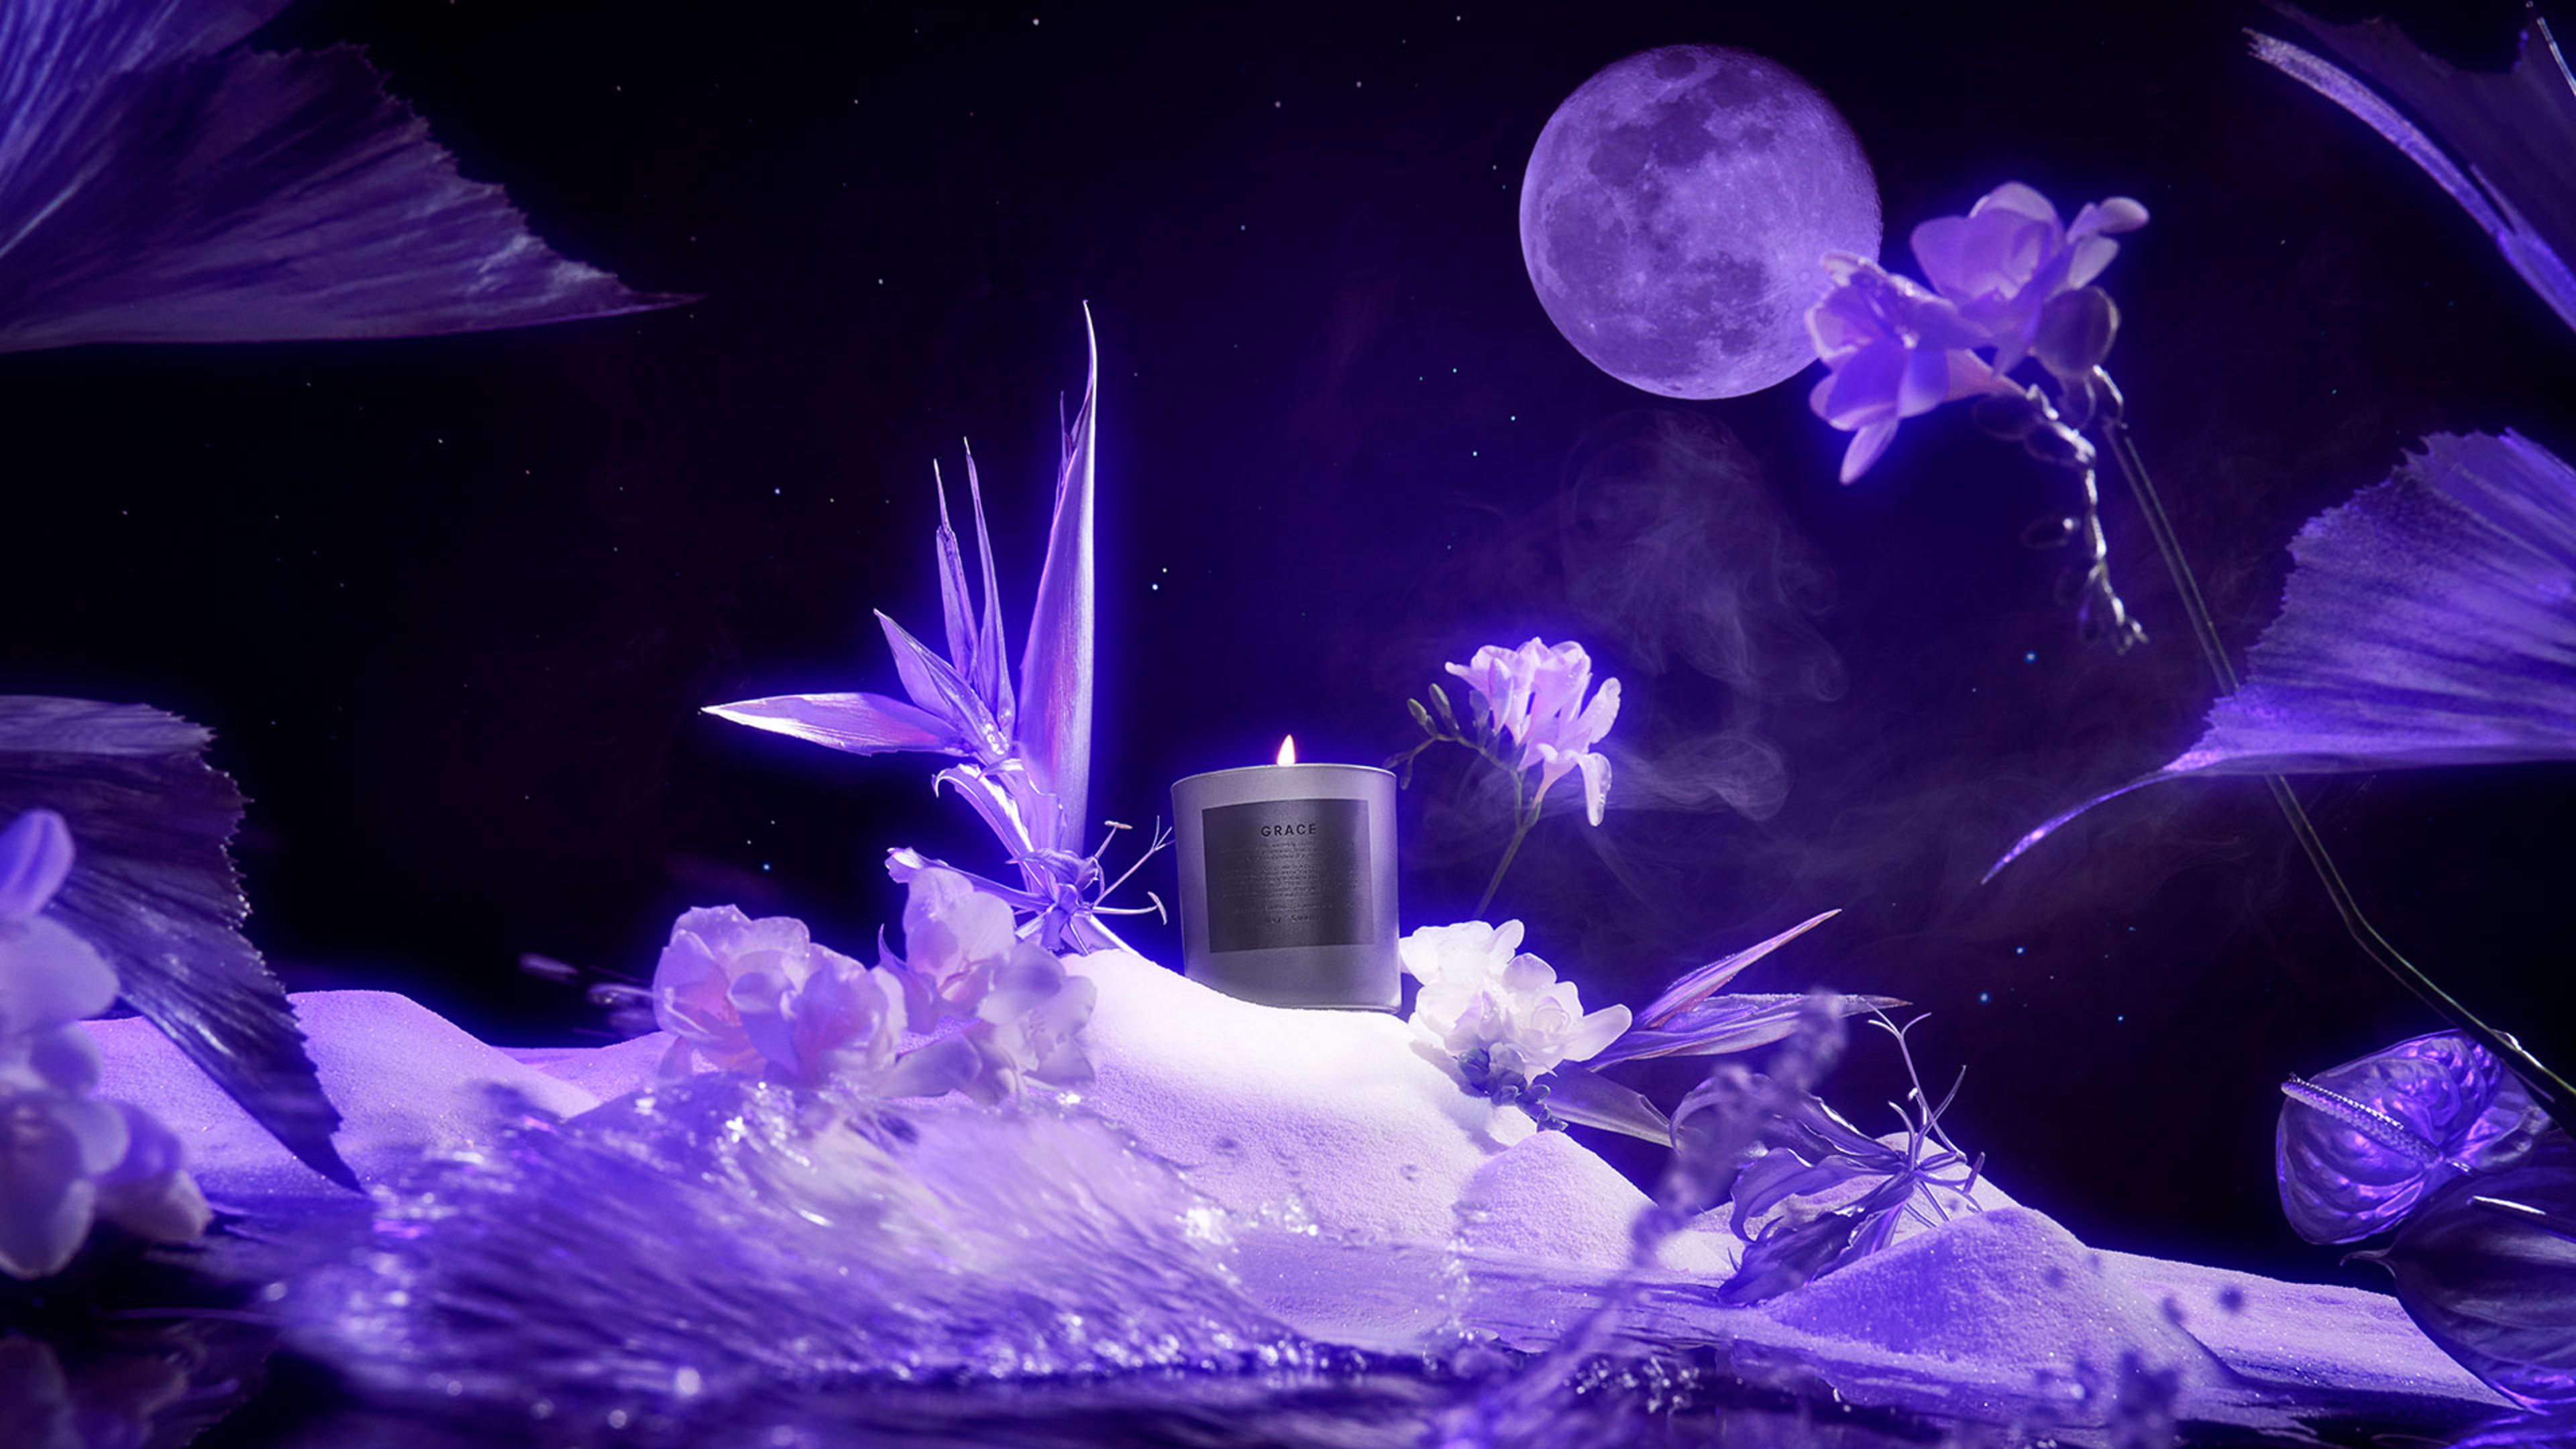 It takes a lot for Grace Jones to say yes. Here’s how this scented-candle brand did it